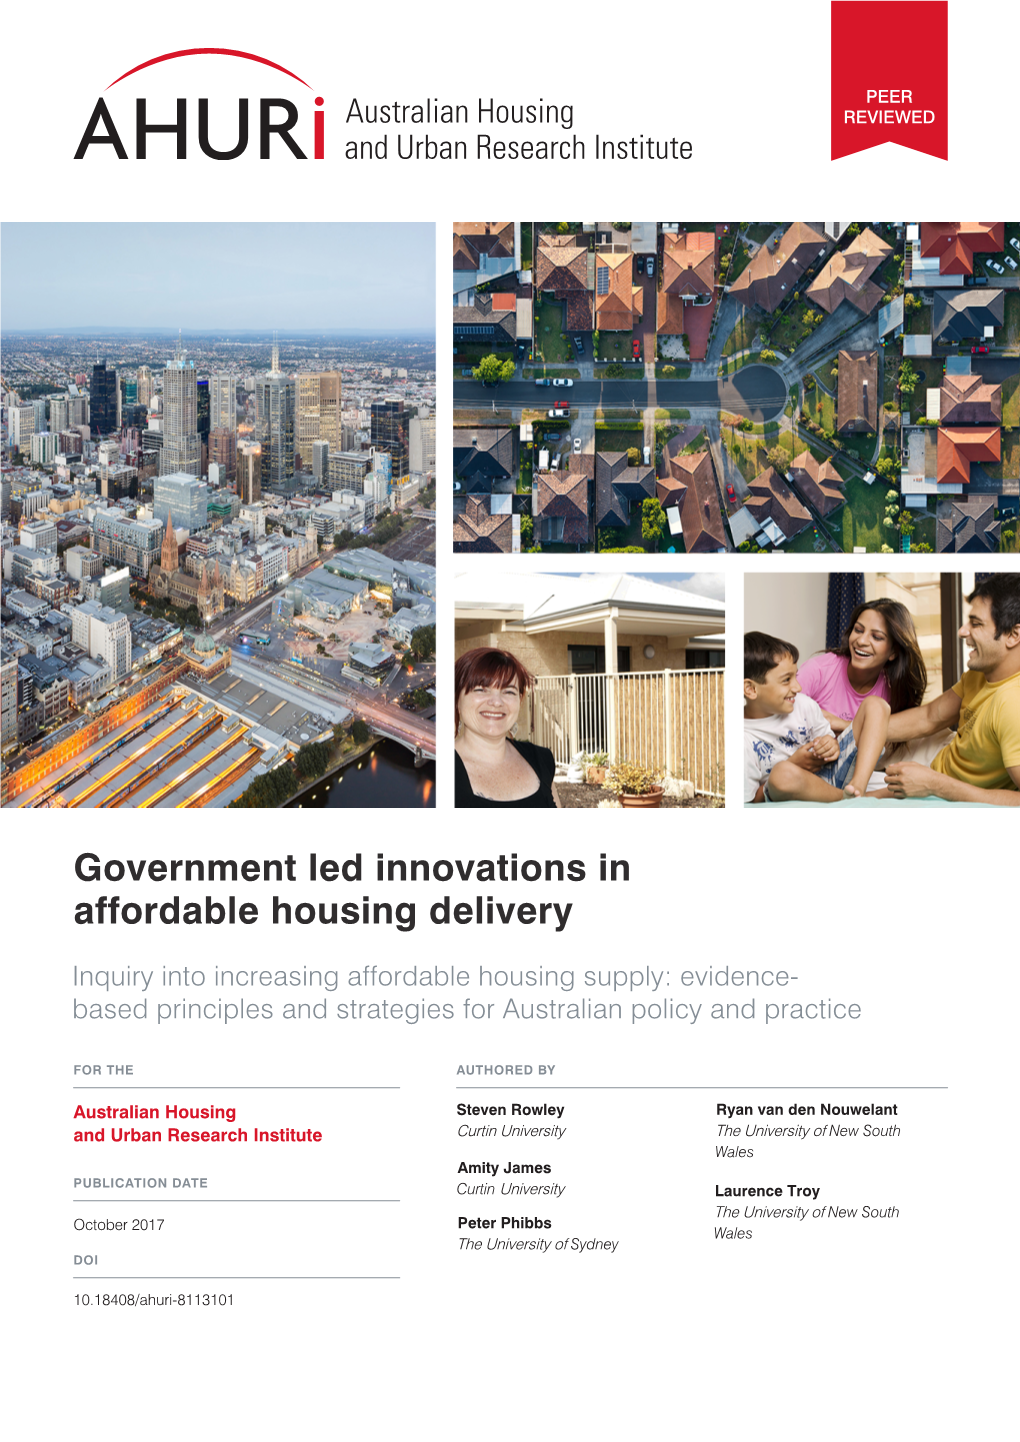 Government Led Innovations in Affordable Housing Delivery